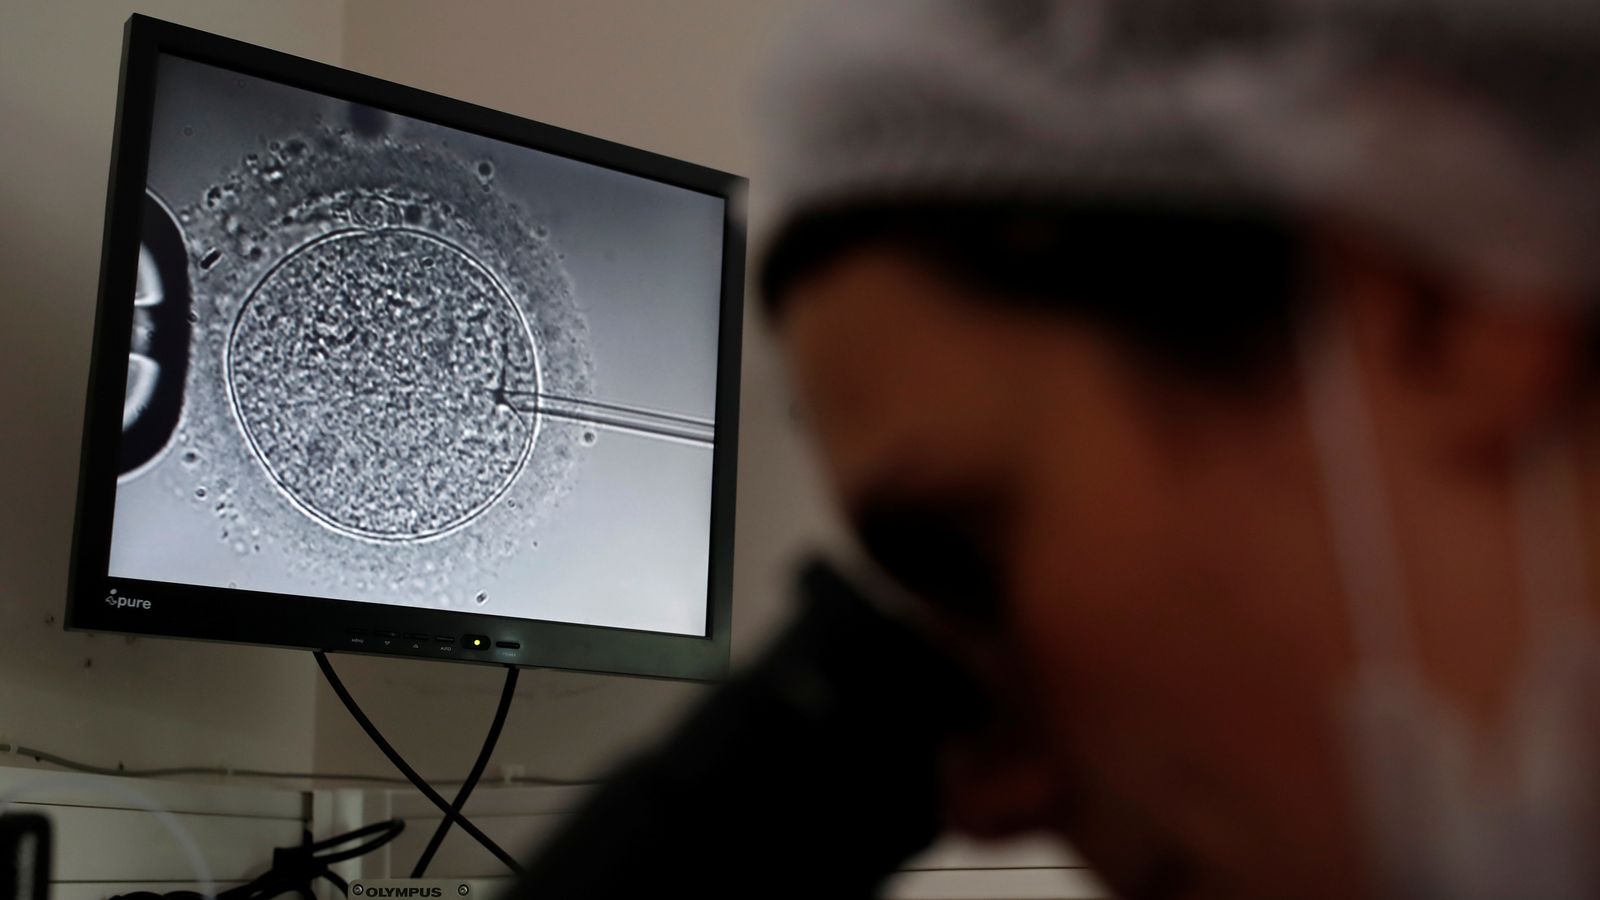 Alabama clinic suspends IVF treatment after court rules embryos are babies